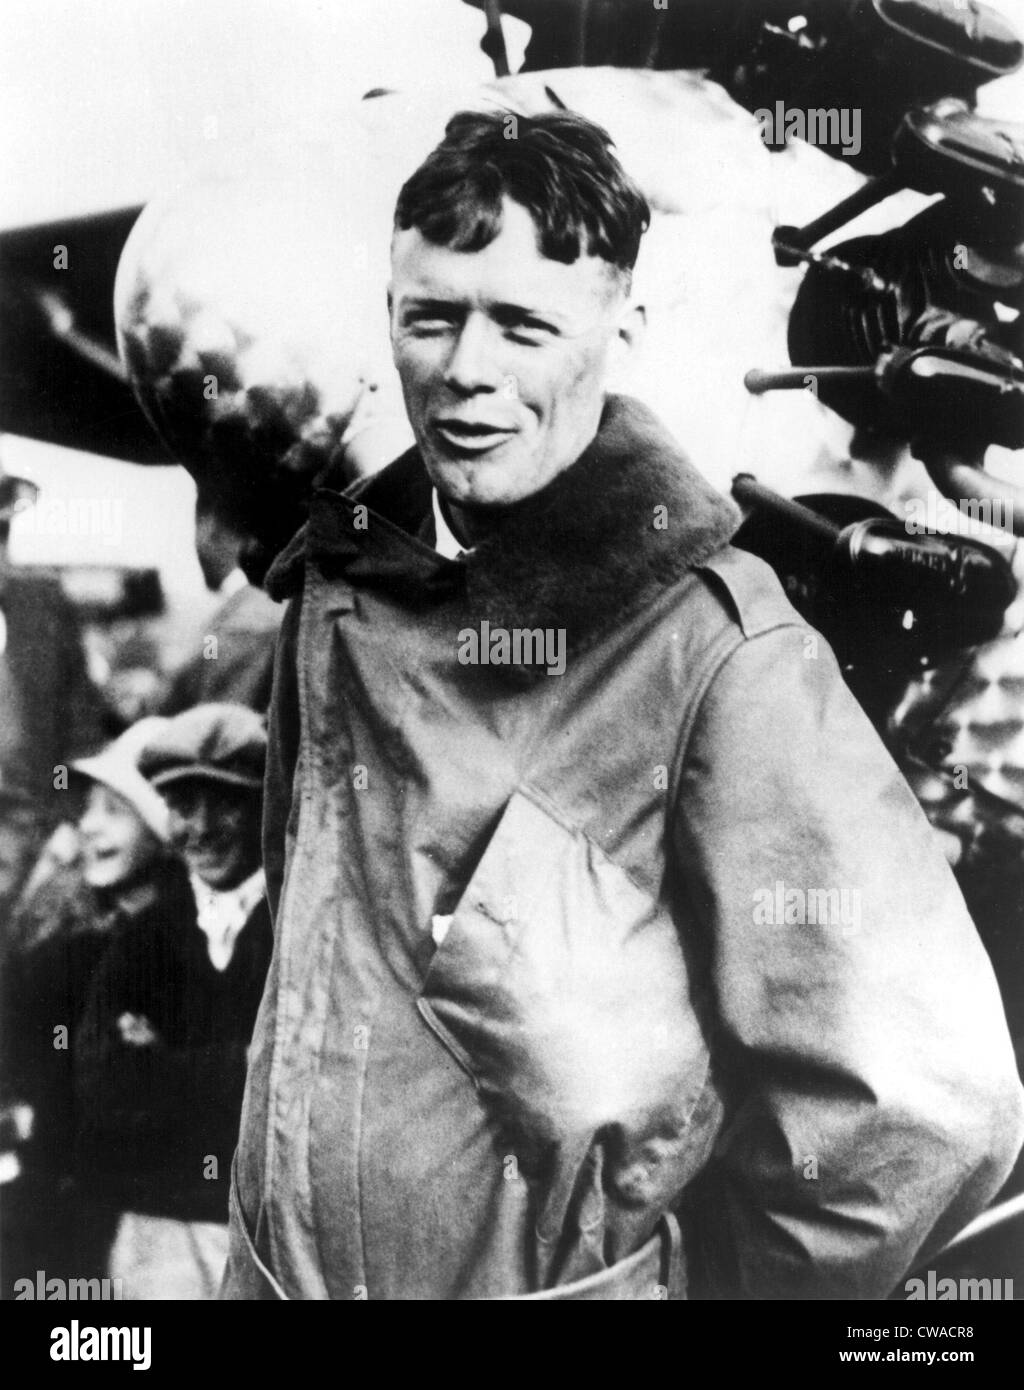 Charles Lindbergh after his trans-Atlantic flight, Paris, 1927. Courtesy: CSU Archives / Everett Collection Stock Photo